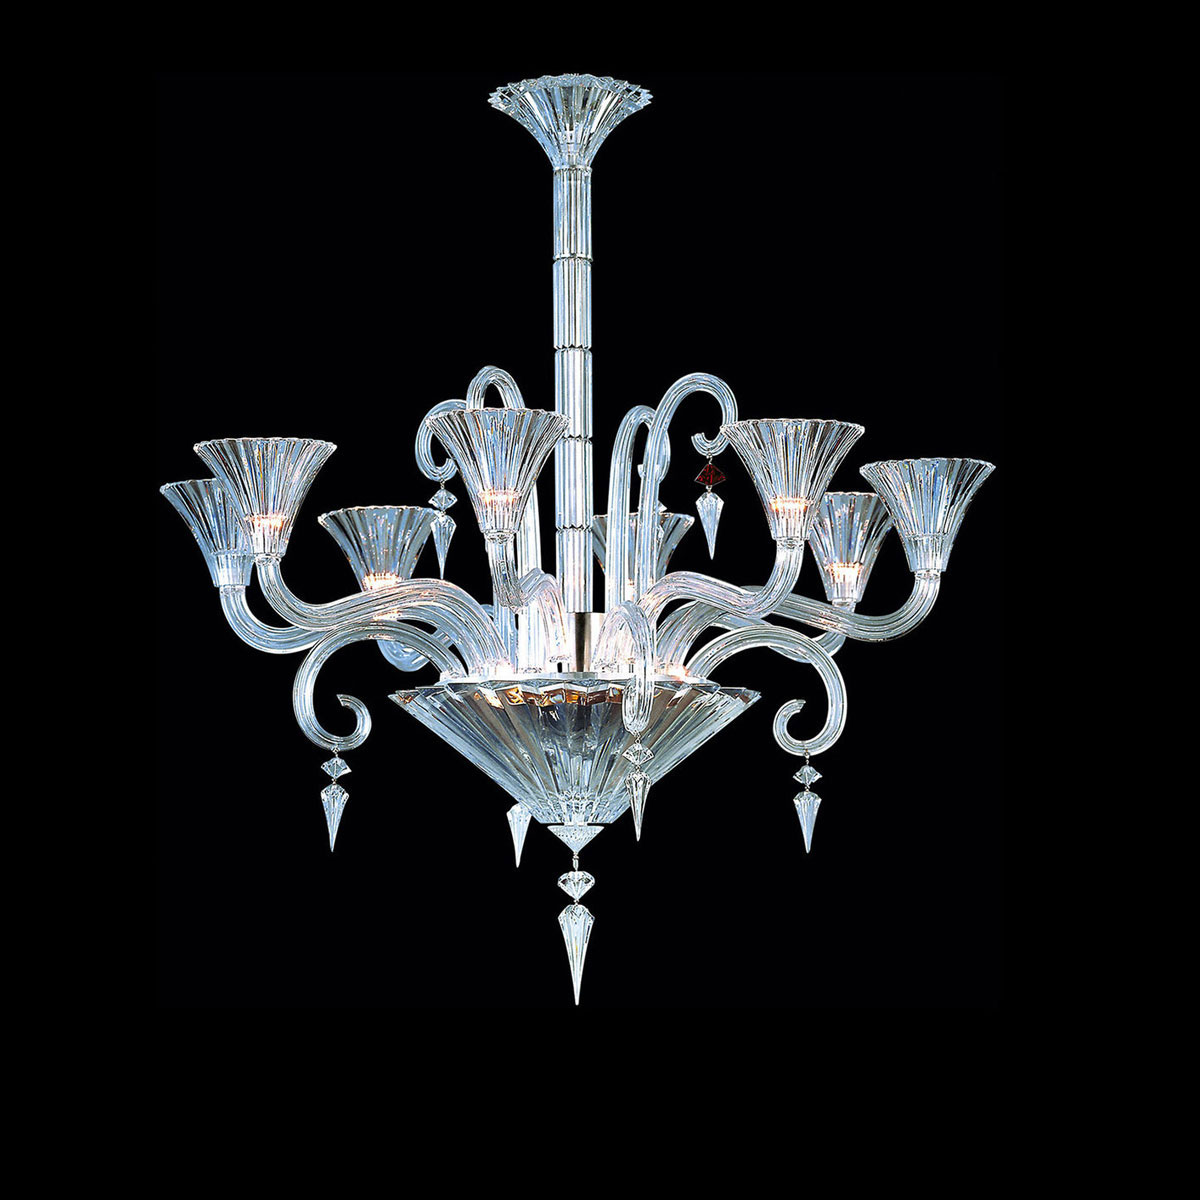 Baccarat Crystal, Mille Nuits 8 Light Chandelier, With Lighted Bowl